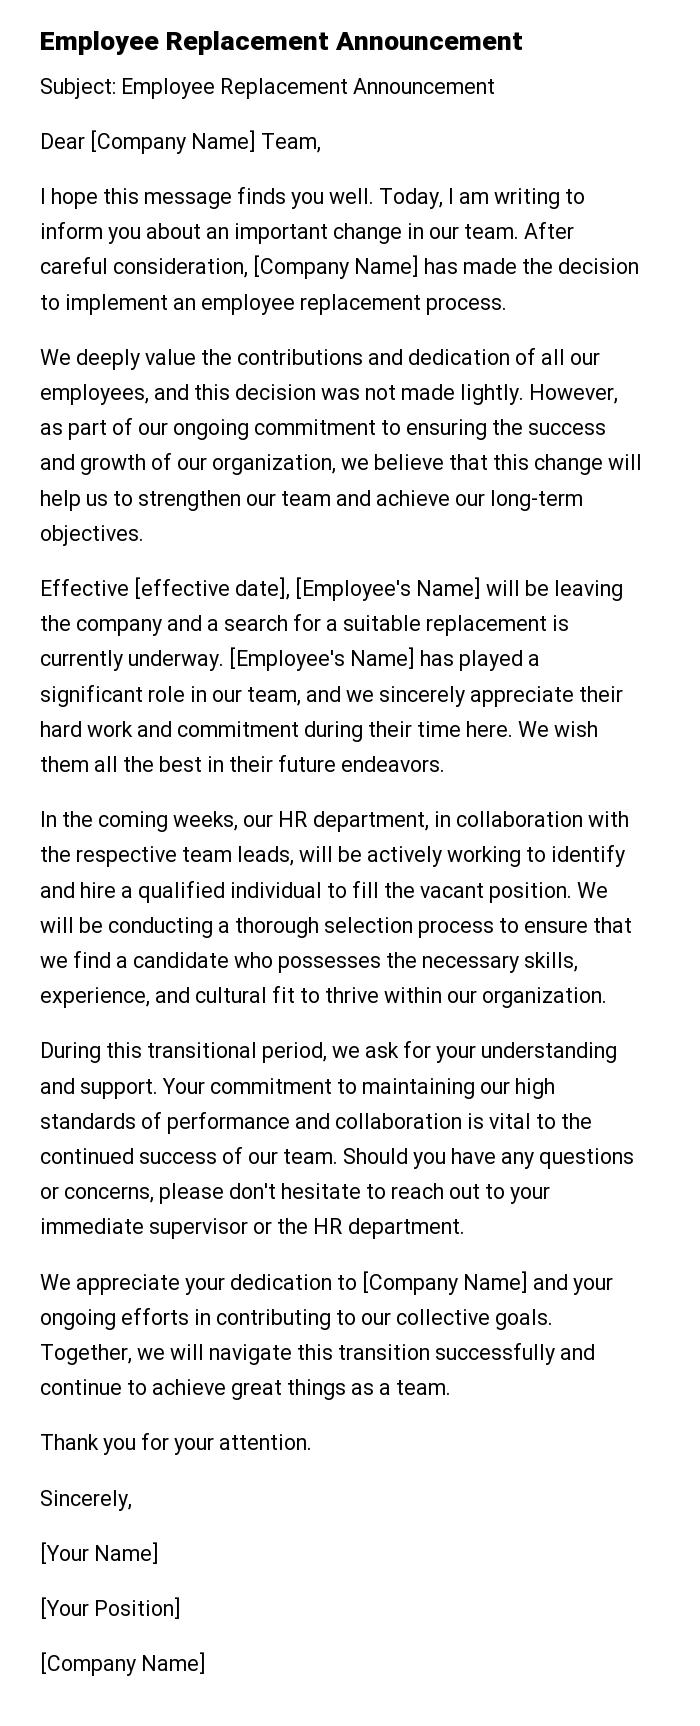 Employee Replacement Announcement